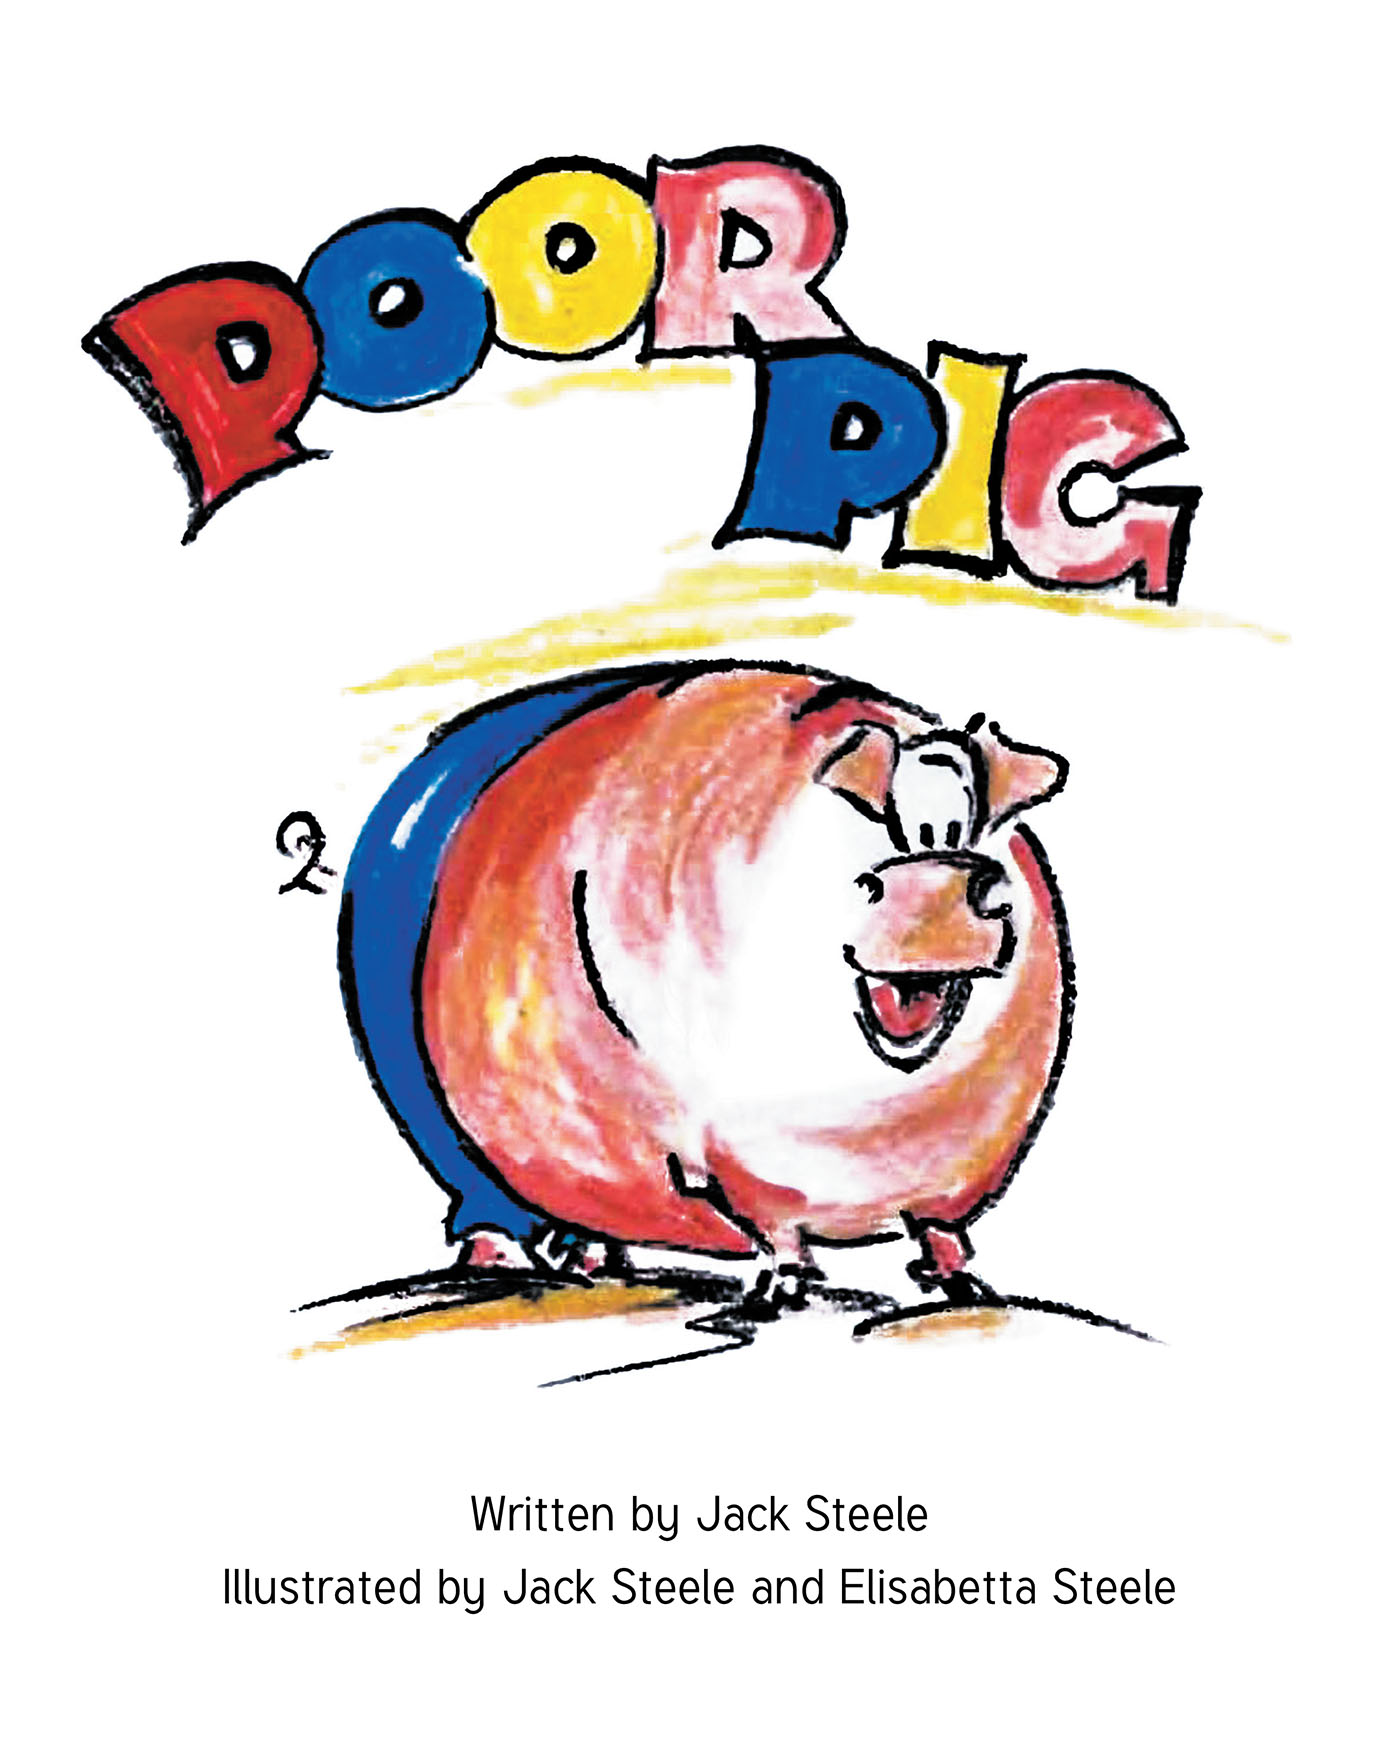 Author Jack Steele’s New Book, "Poor Pig," is a Heartwarming Tale of Friends on a Farm Coming Together to Offer a Helping Hand to a Pig Who Needs to Get Back on His Feet